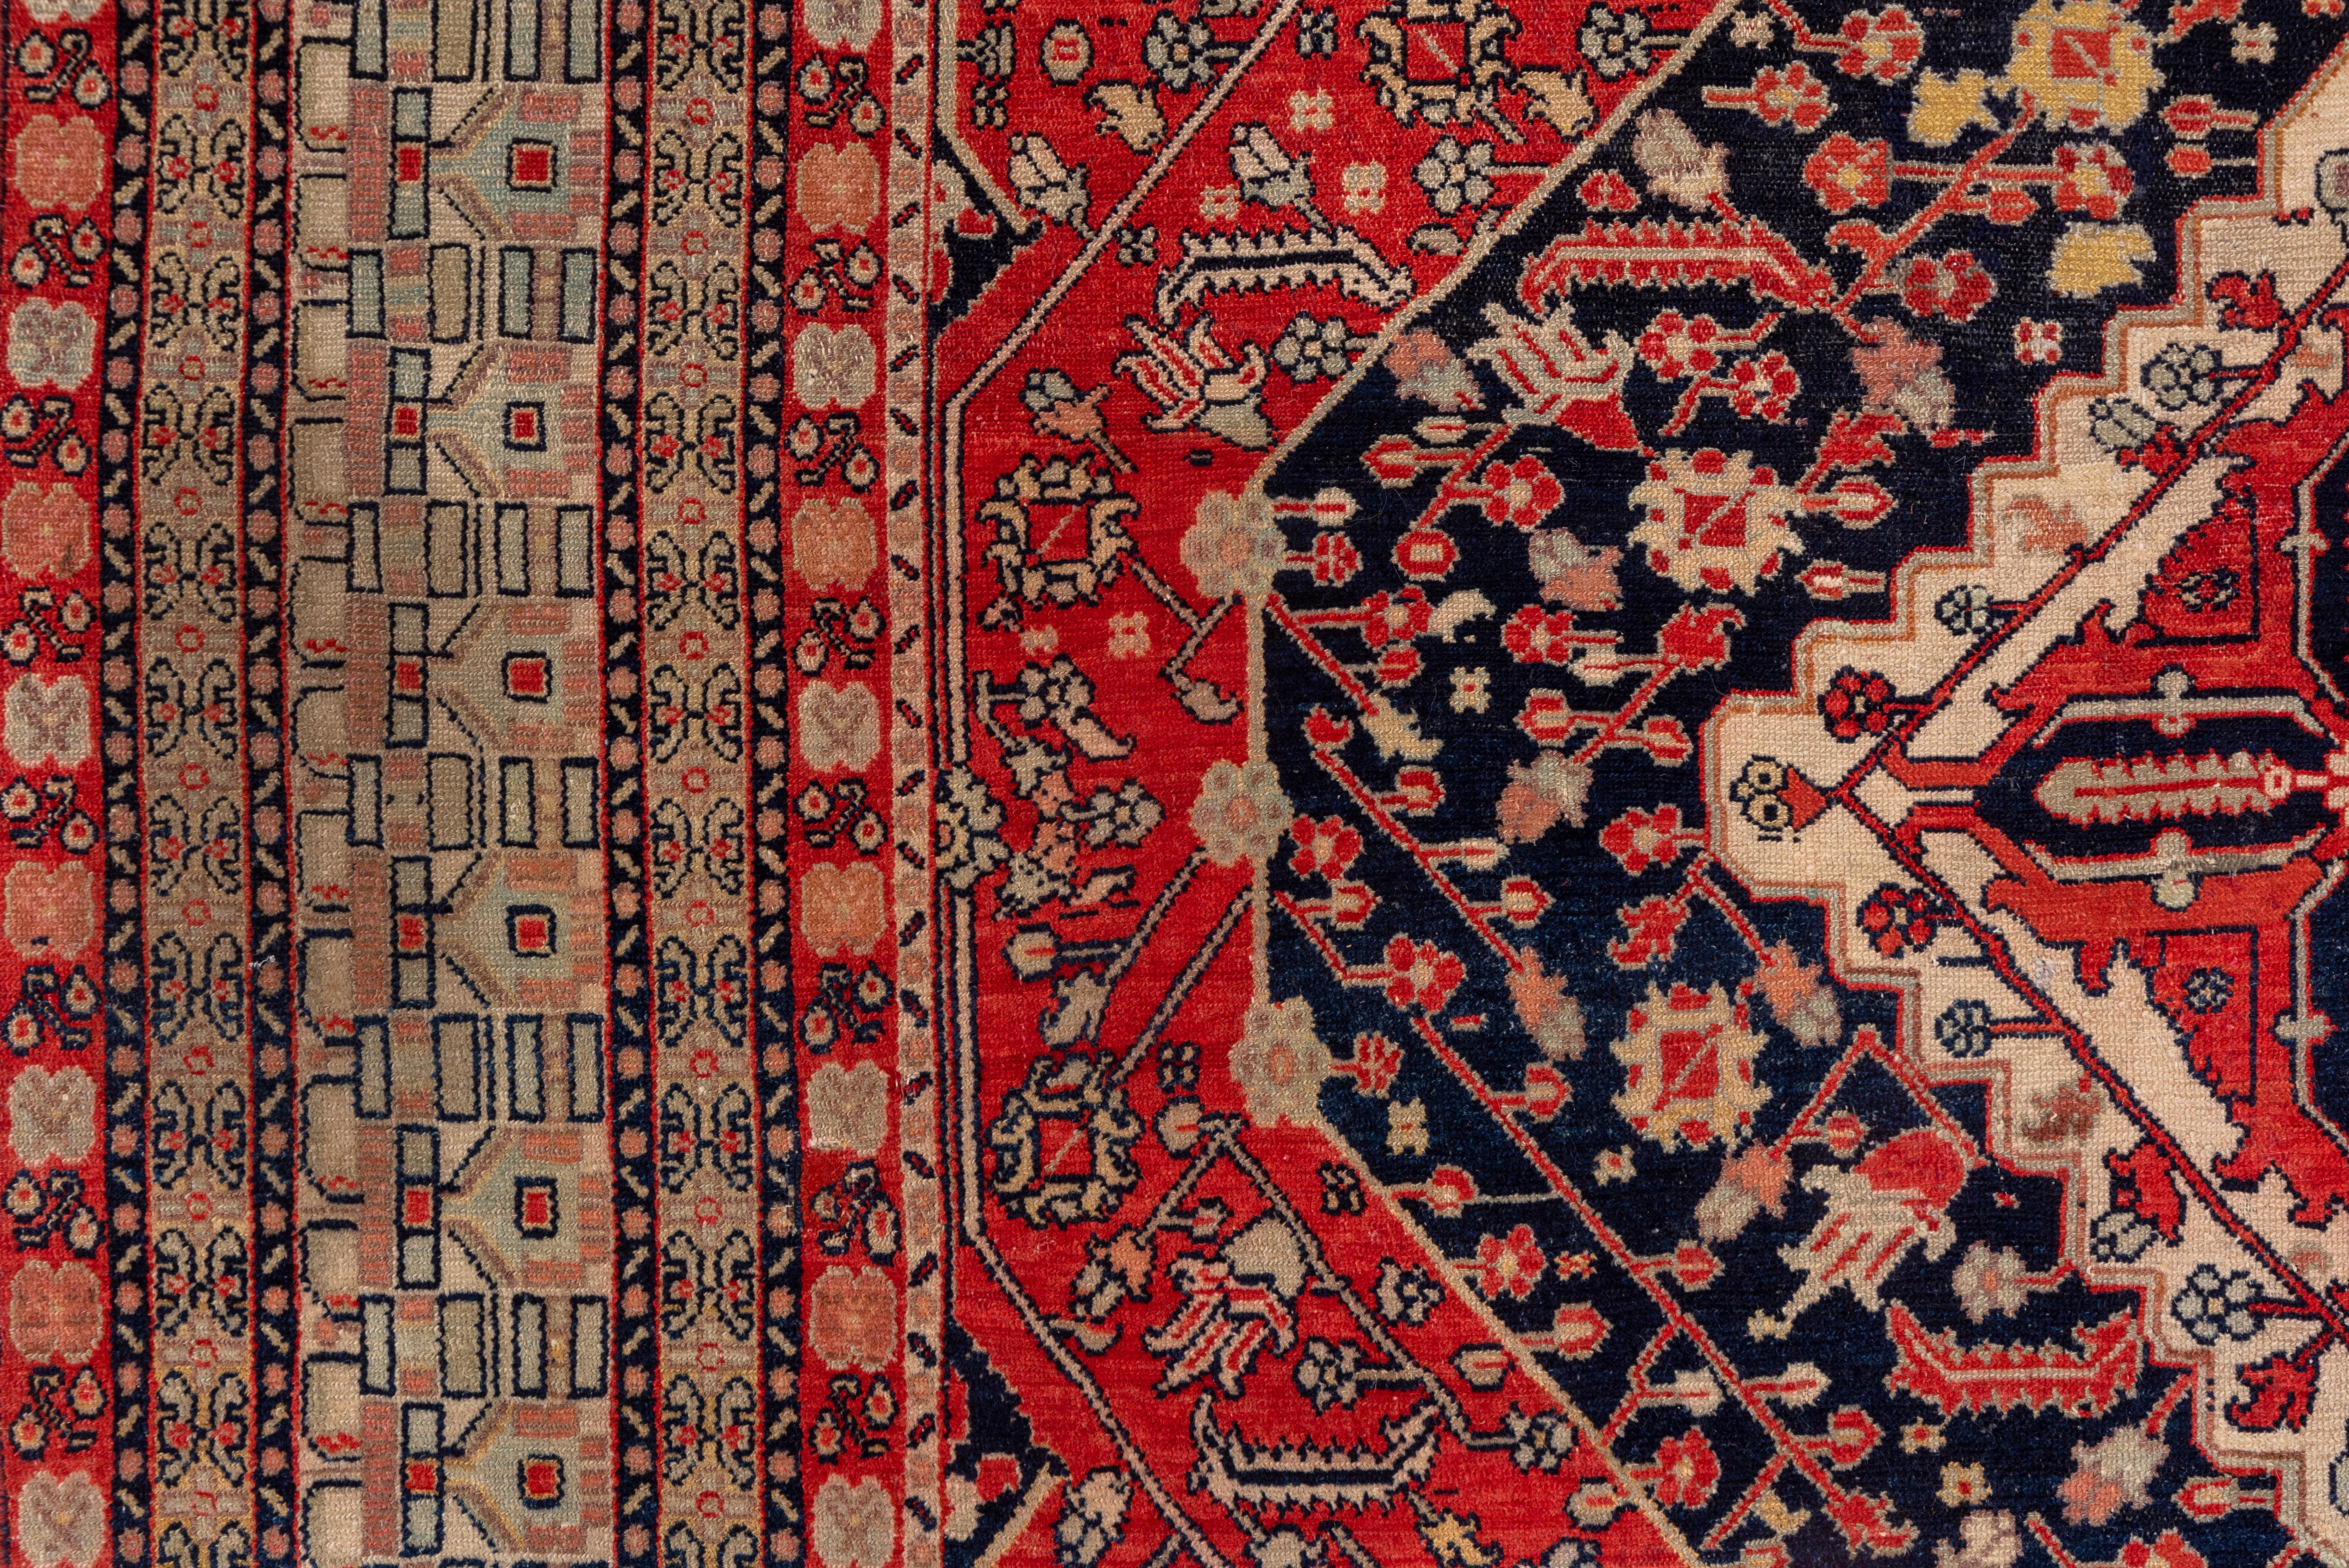 This is a very rare finely woven Kurdish town rug copying a contemporaneous Mohtasham Kashan, with a navy, red and ivory layered medallion set on a rust-red field with a conforming lozenge line and floral pattern, and en suite navy corners with